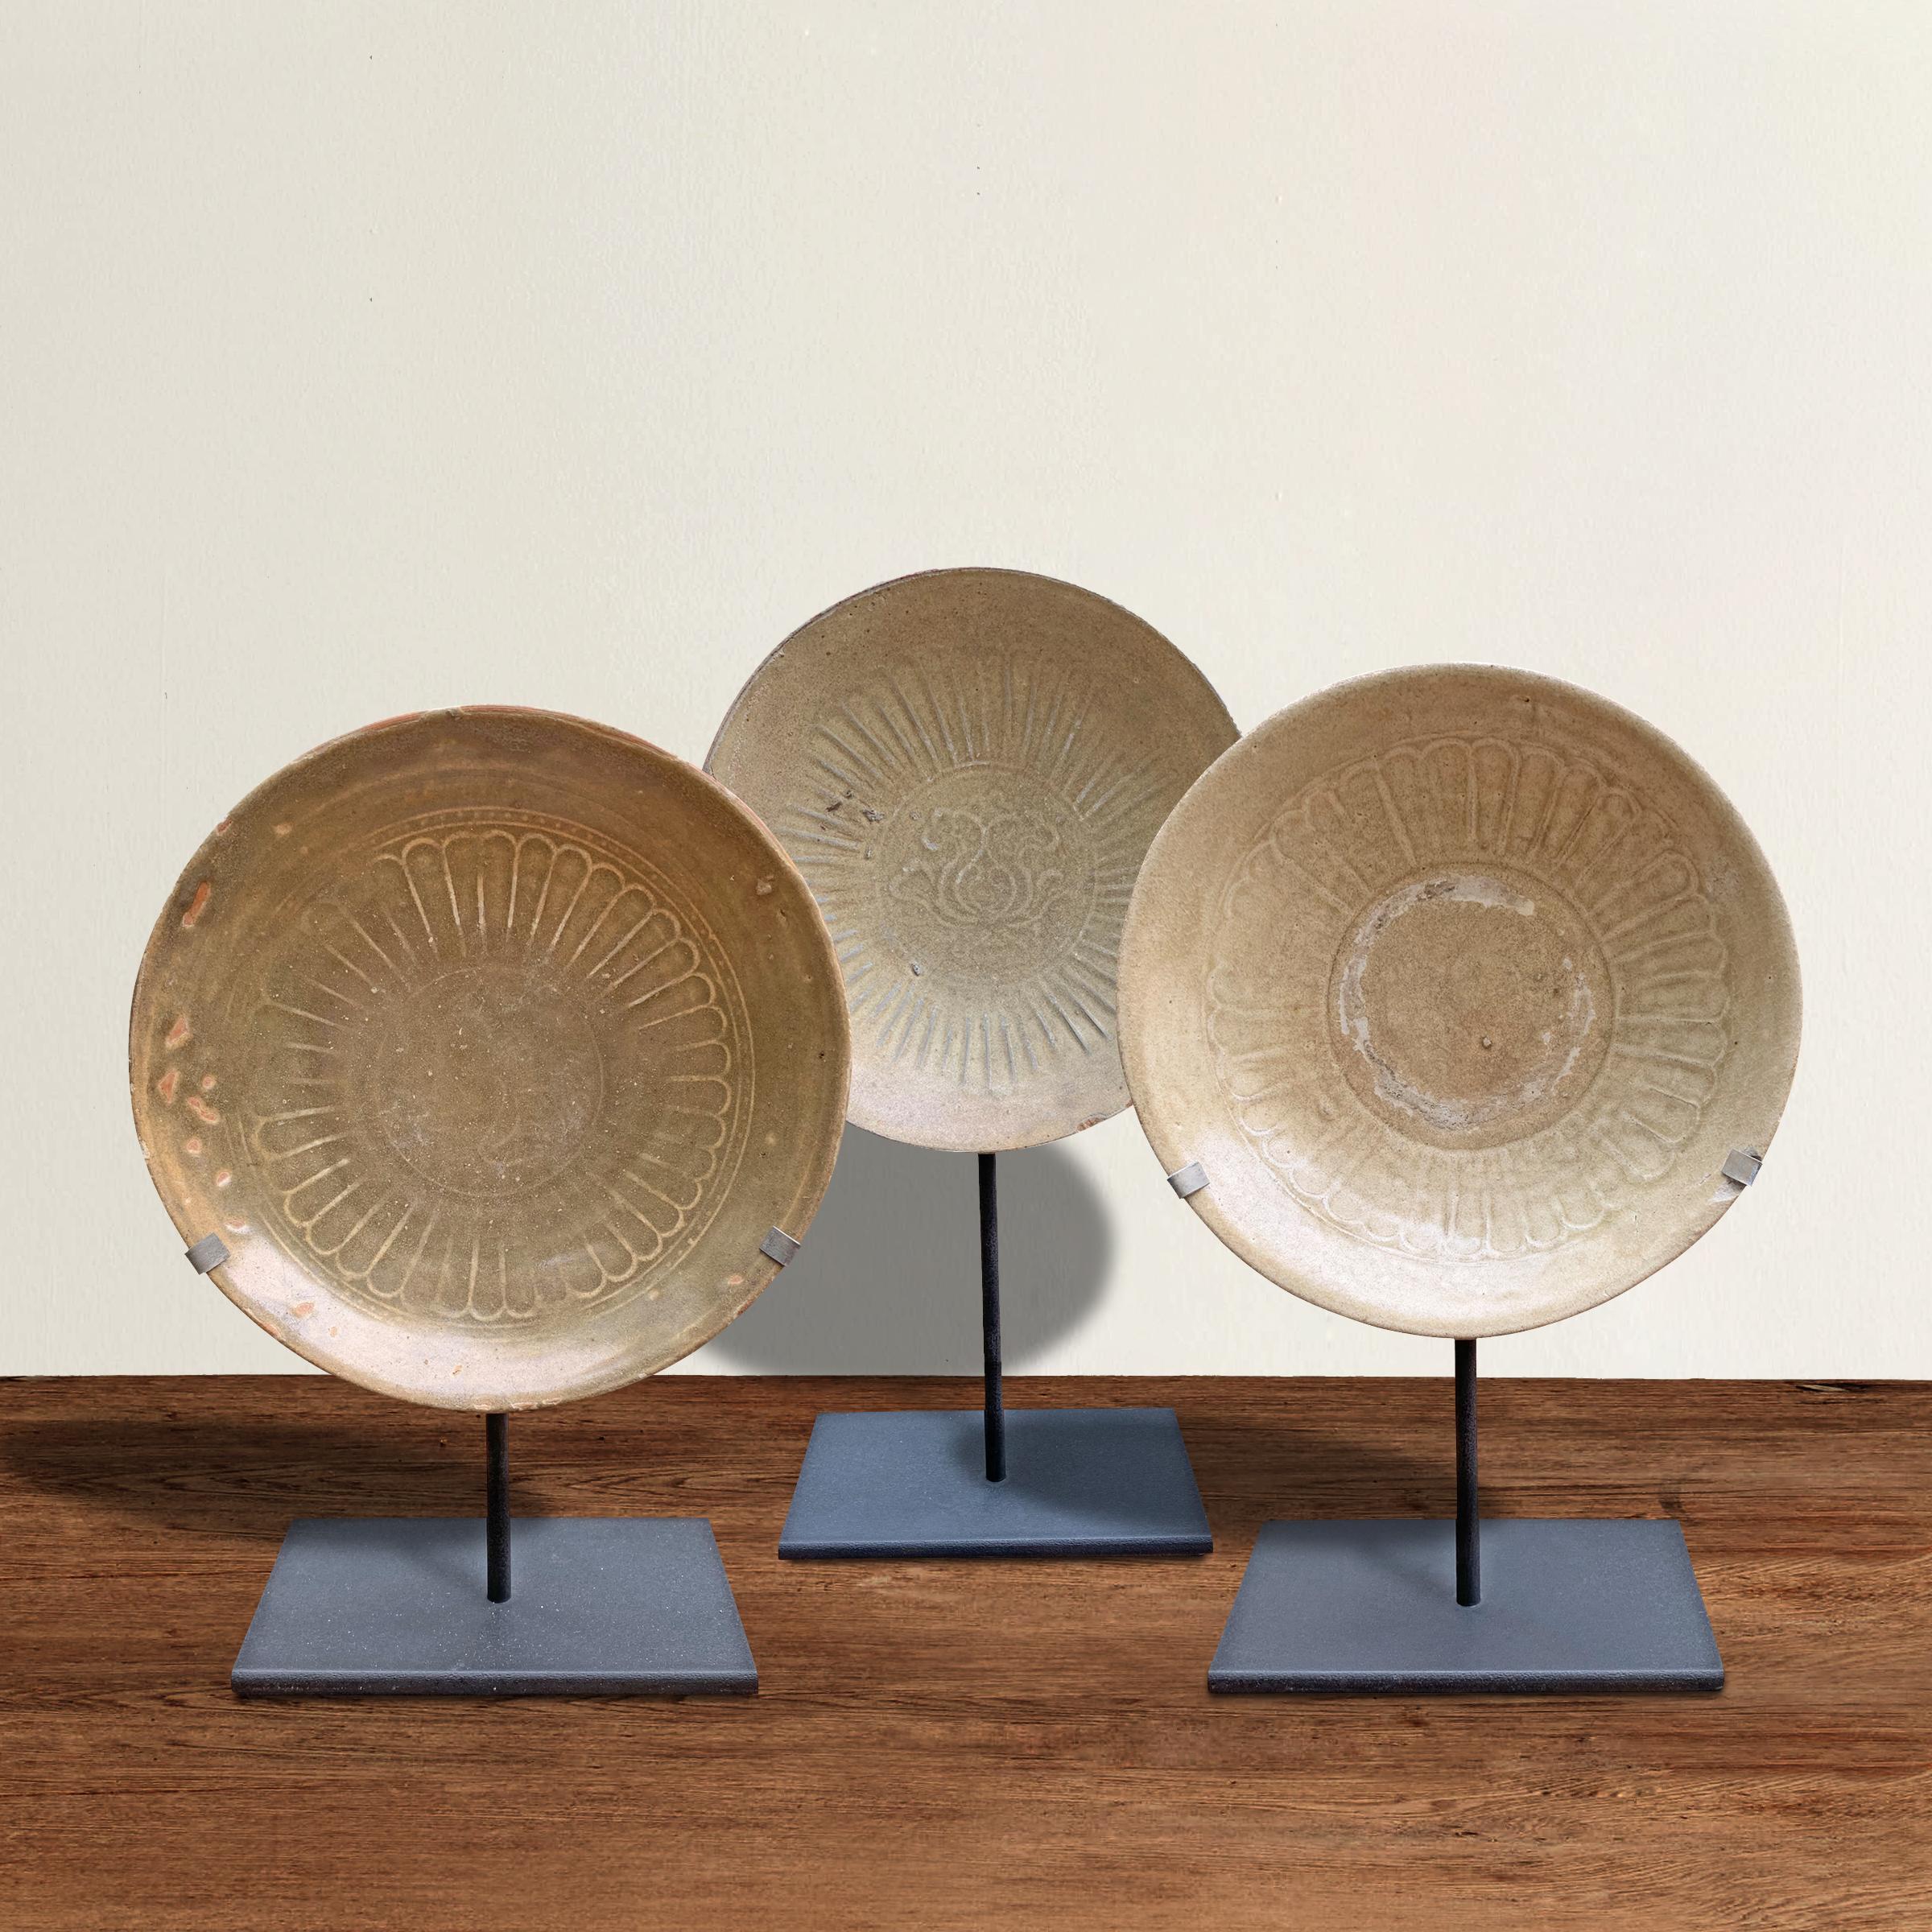 A wonderful set of three Chinese Song Dynasty (960 to 1279 AD) glazed stoneware bowls, each with its own unique lotus flower decoration, and all with beautiful soft beige and green glazes, and mounted on custom steel stands.